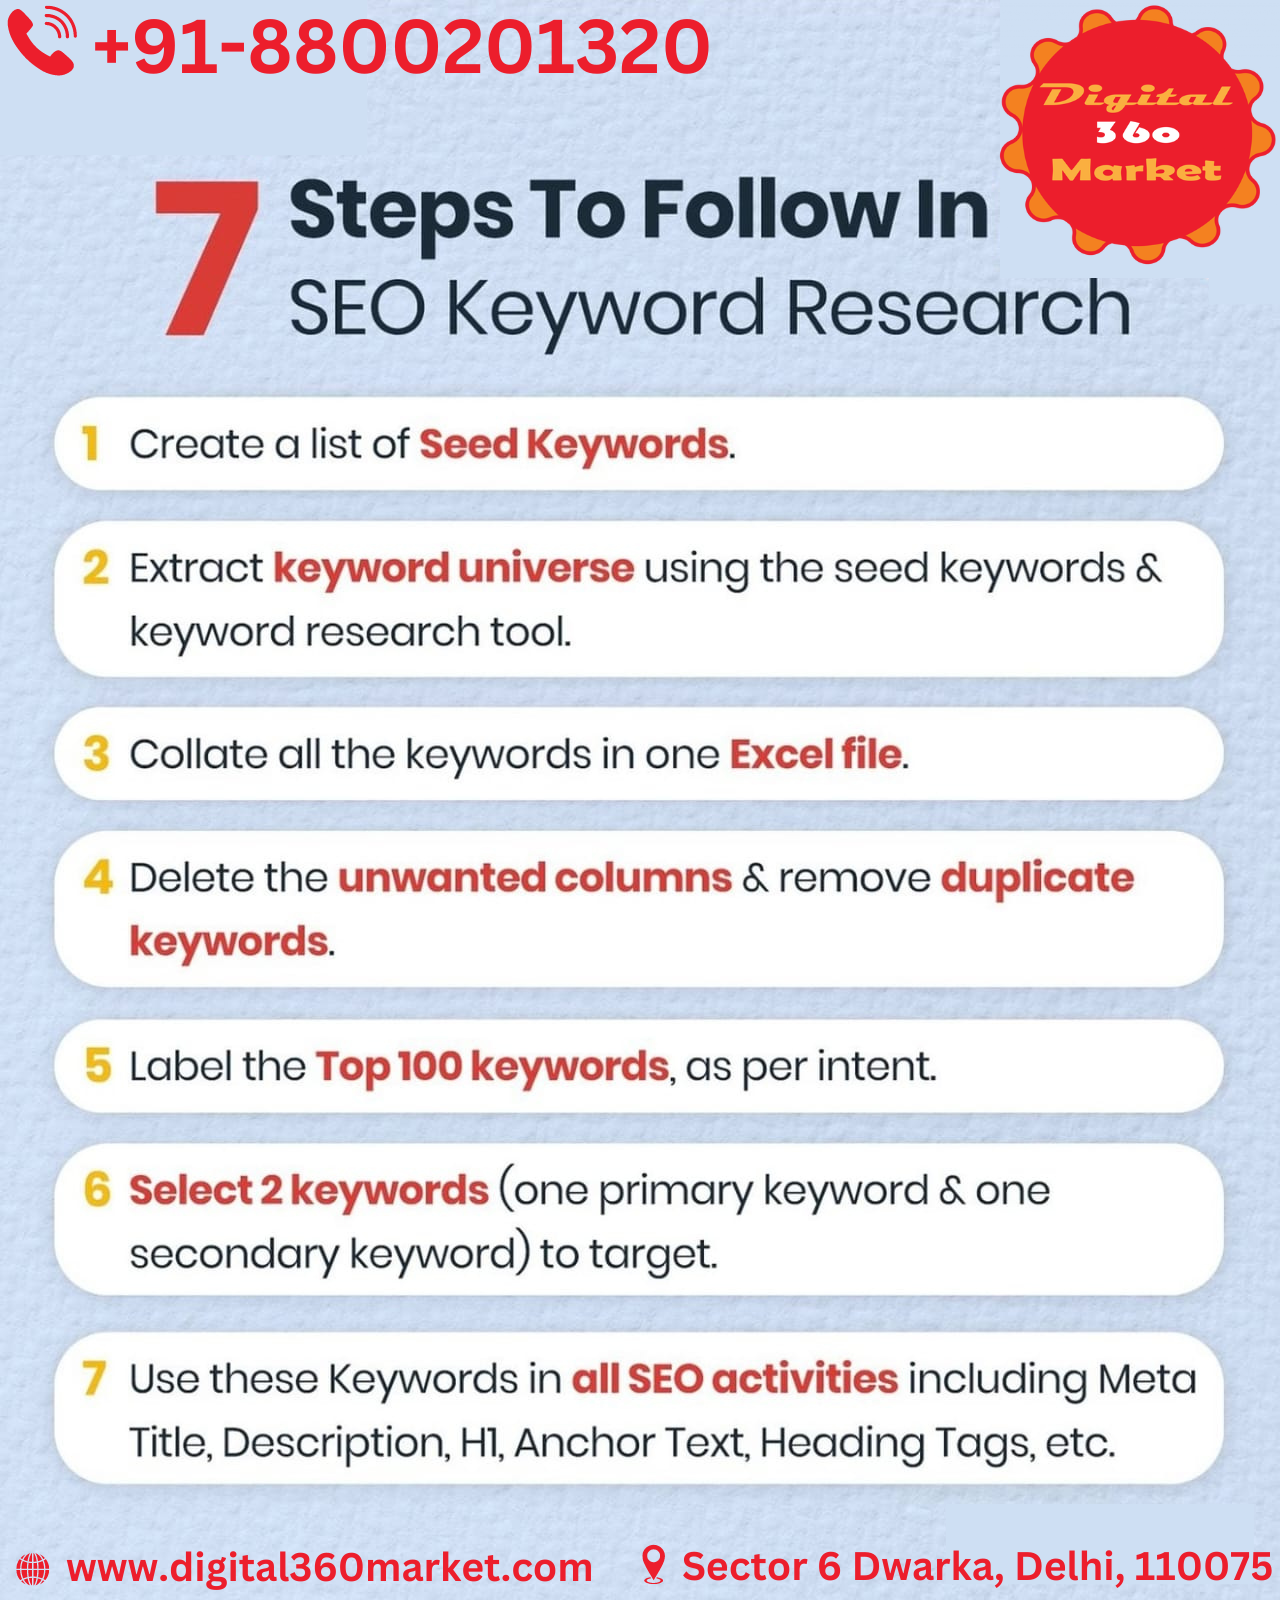 7 Steps To Follow In SEO Keyword Research